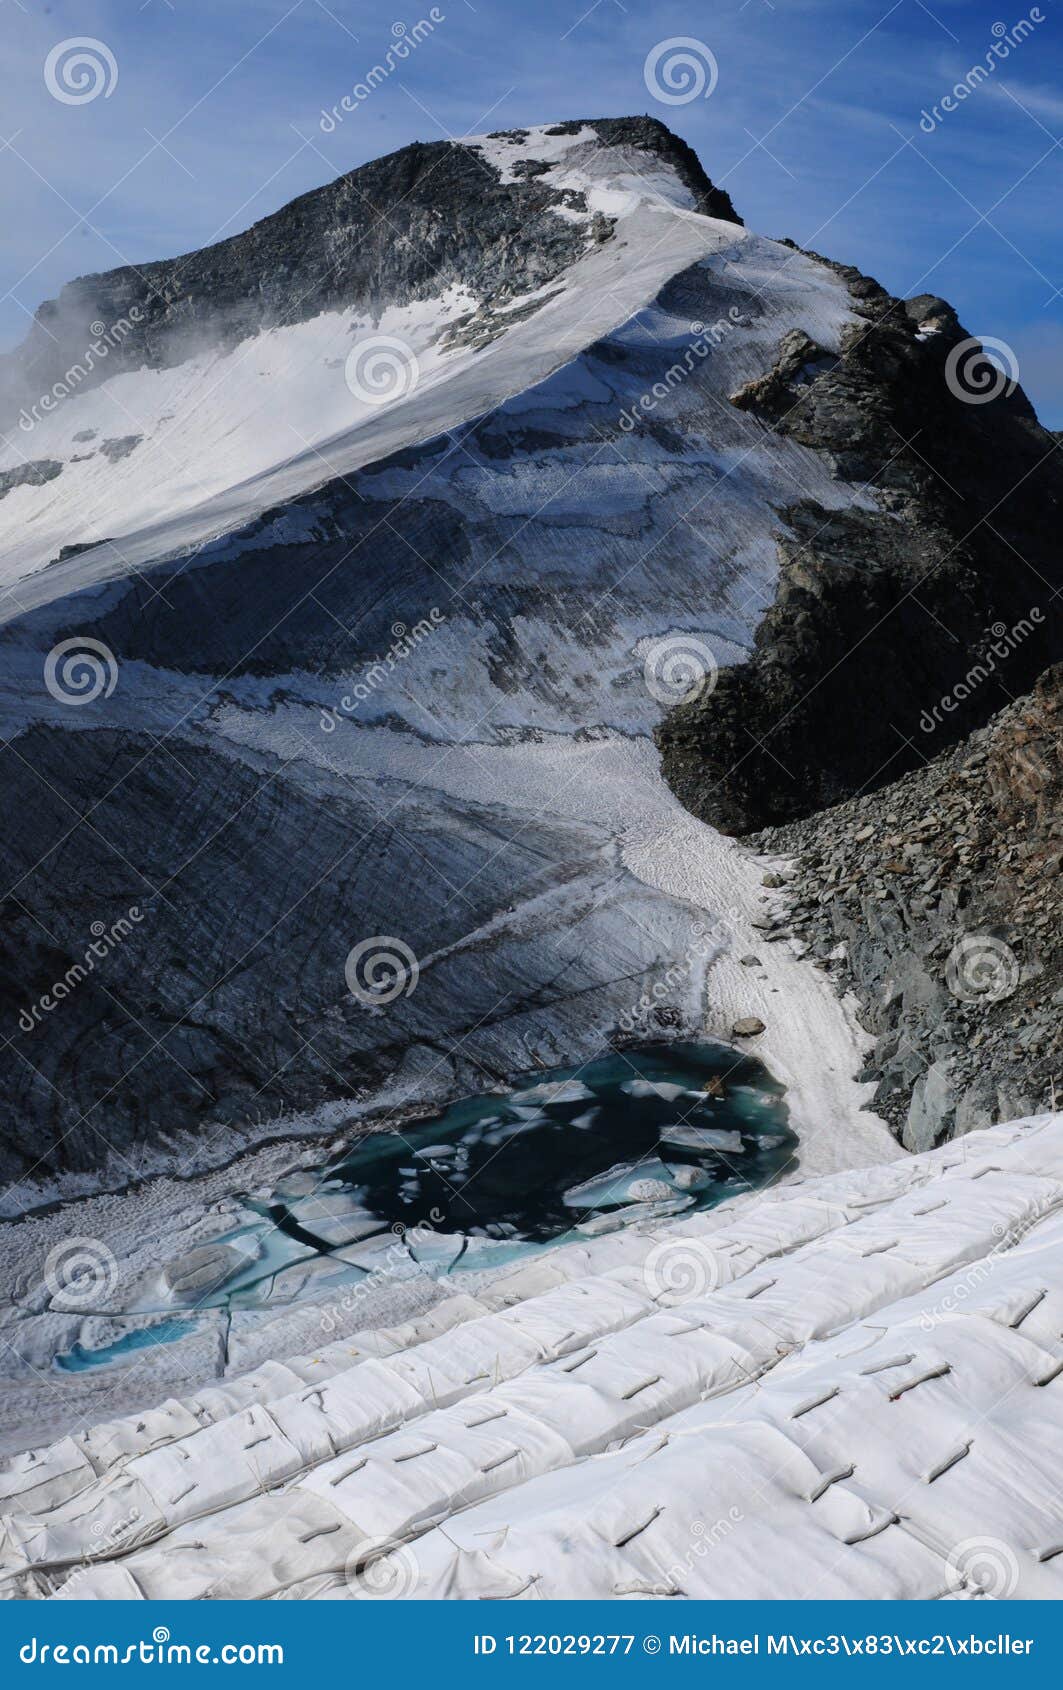 global clima change: melting piz corvatsch glacier in the upper engadin